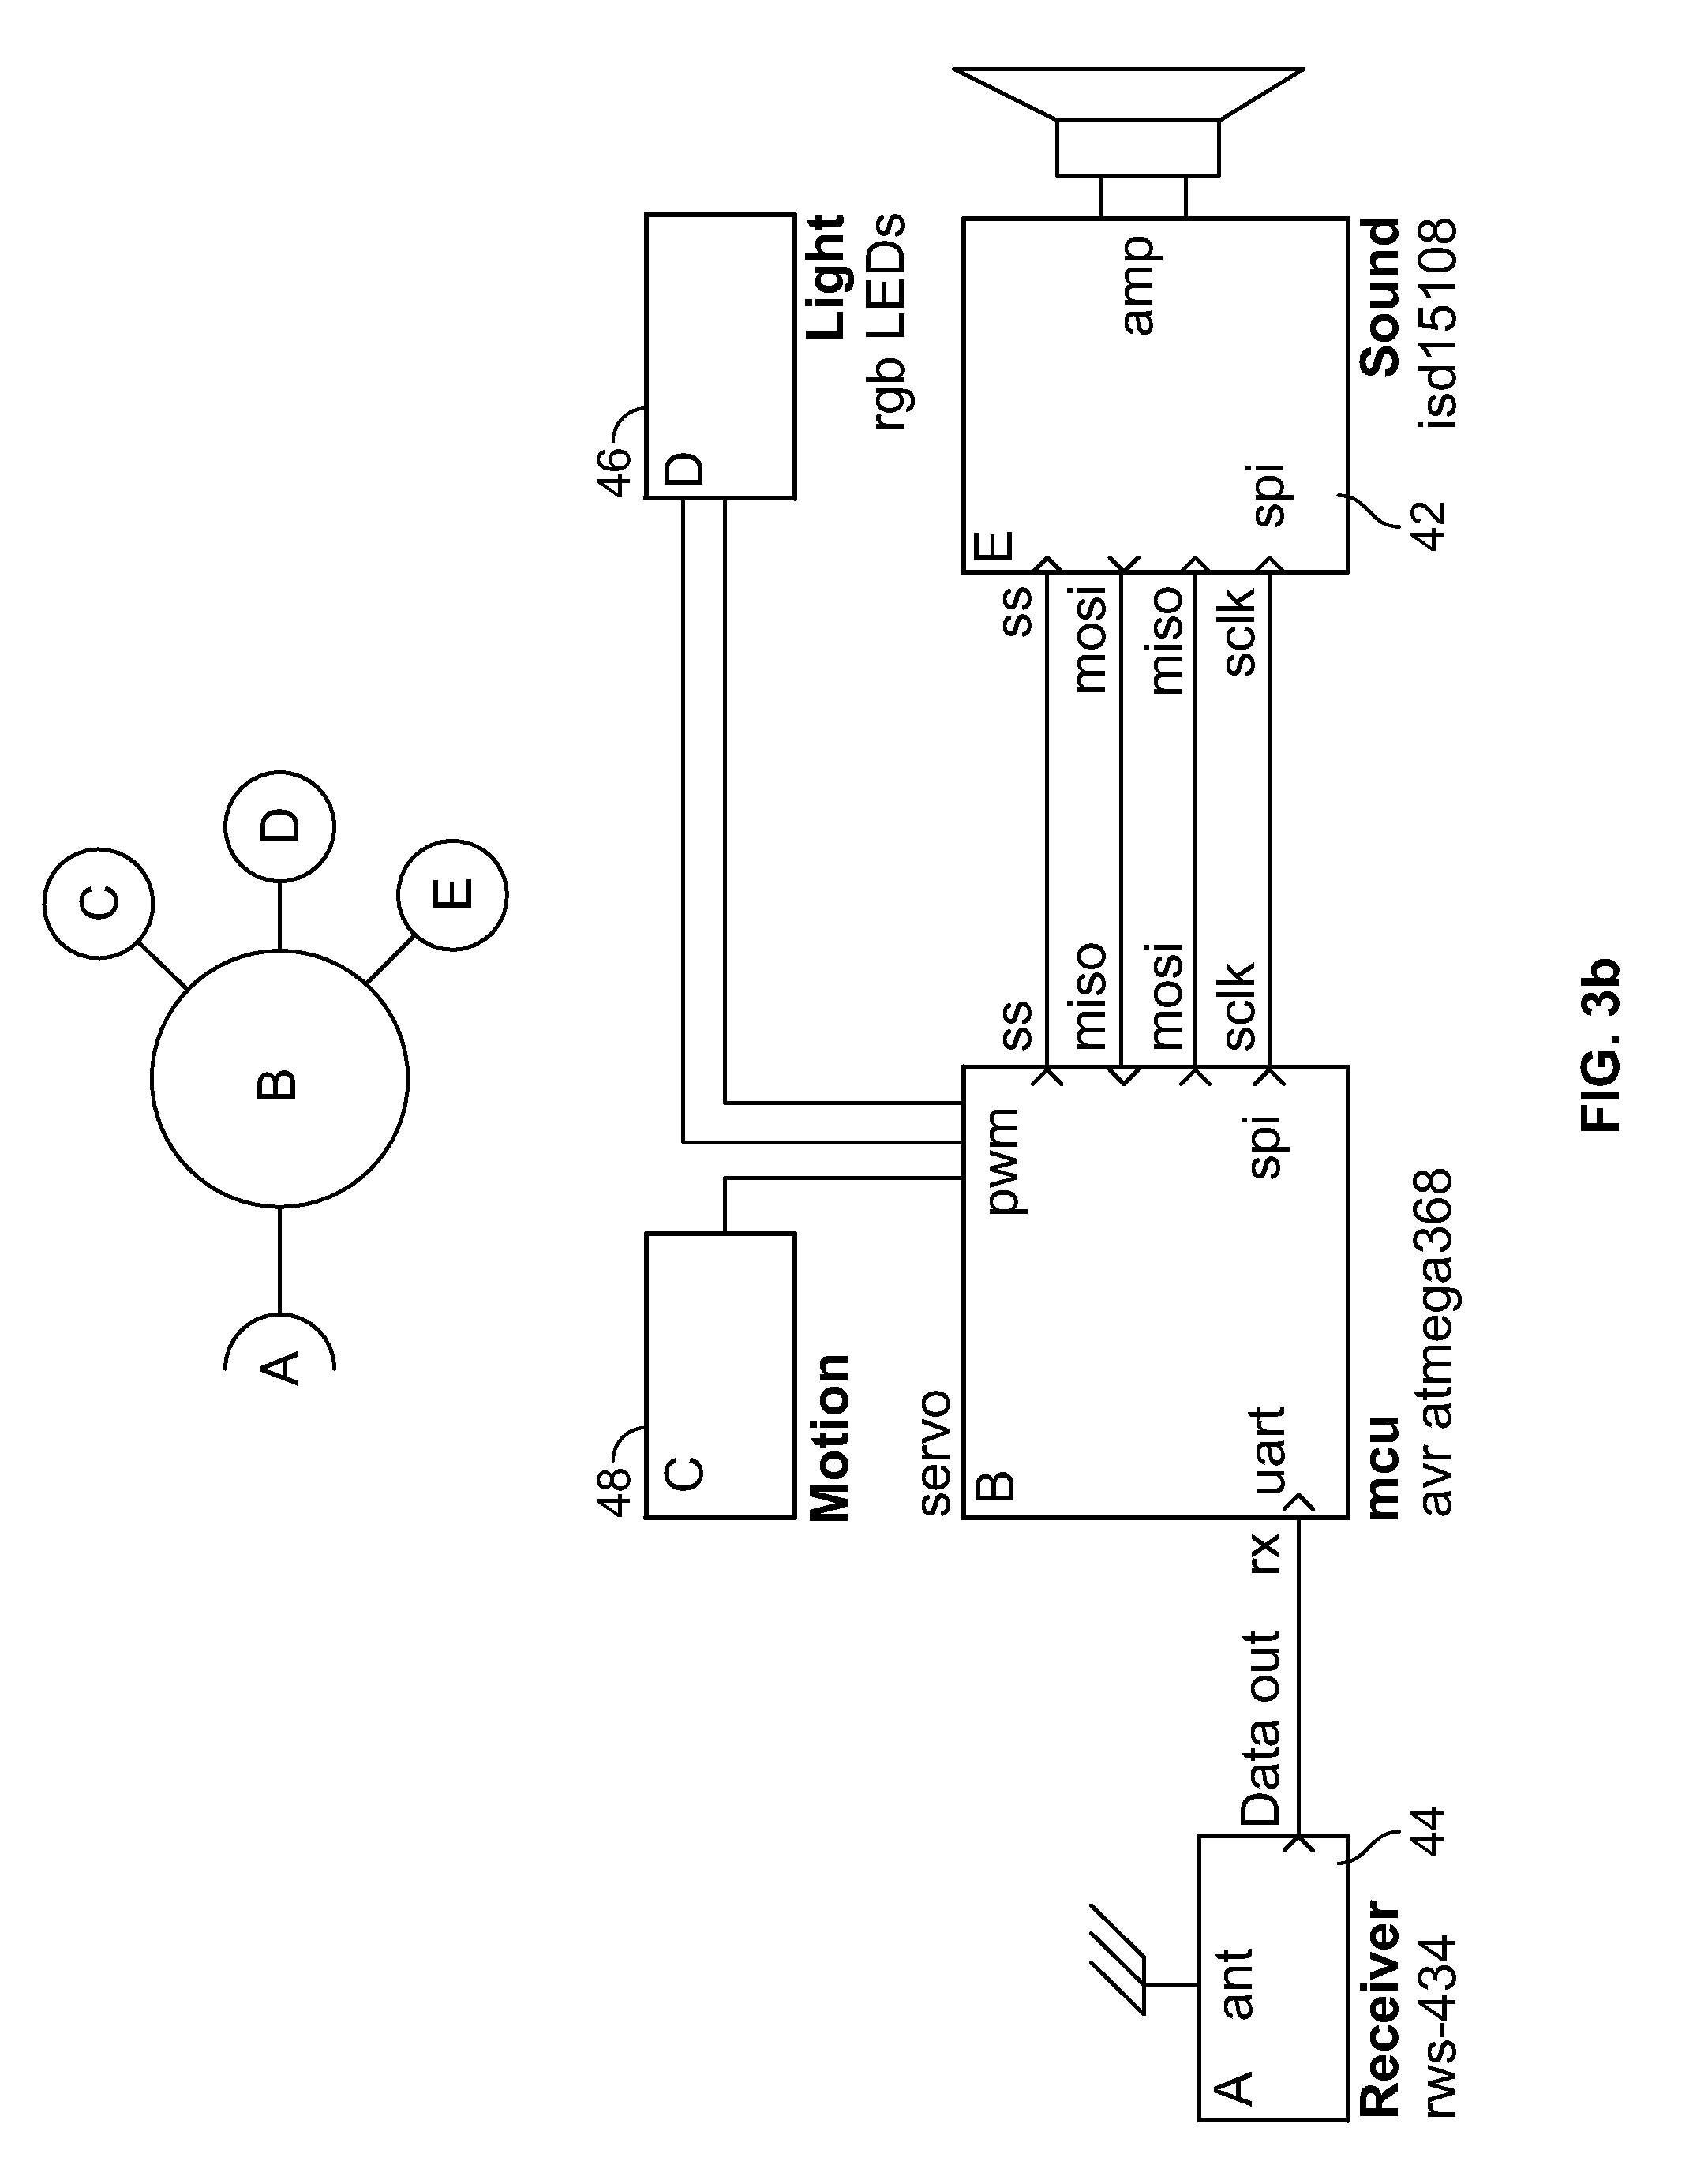 Light, sound, and motion receiver devices